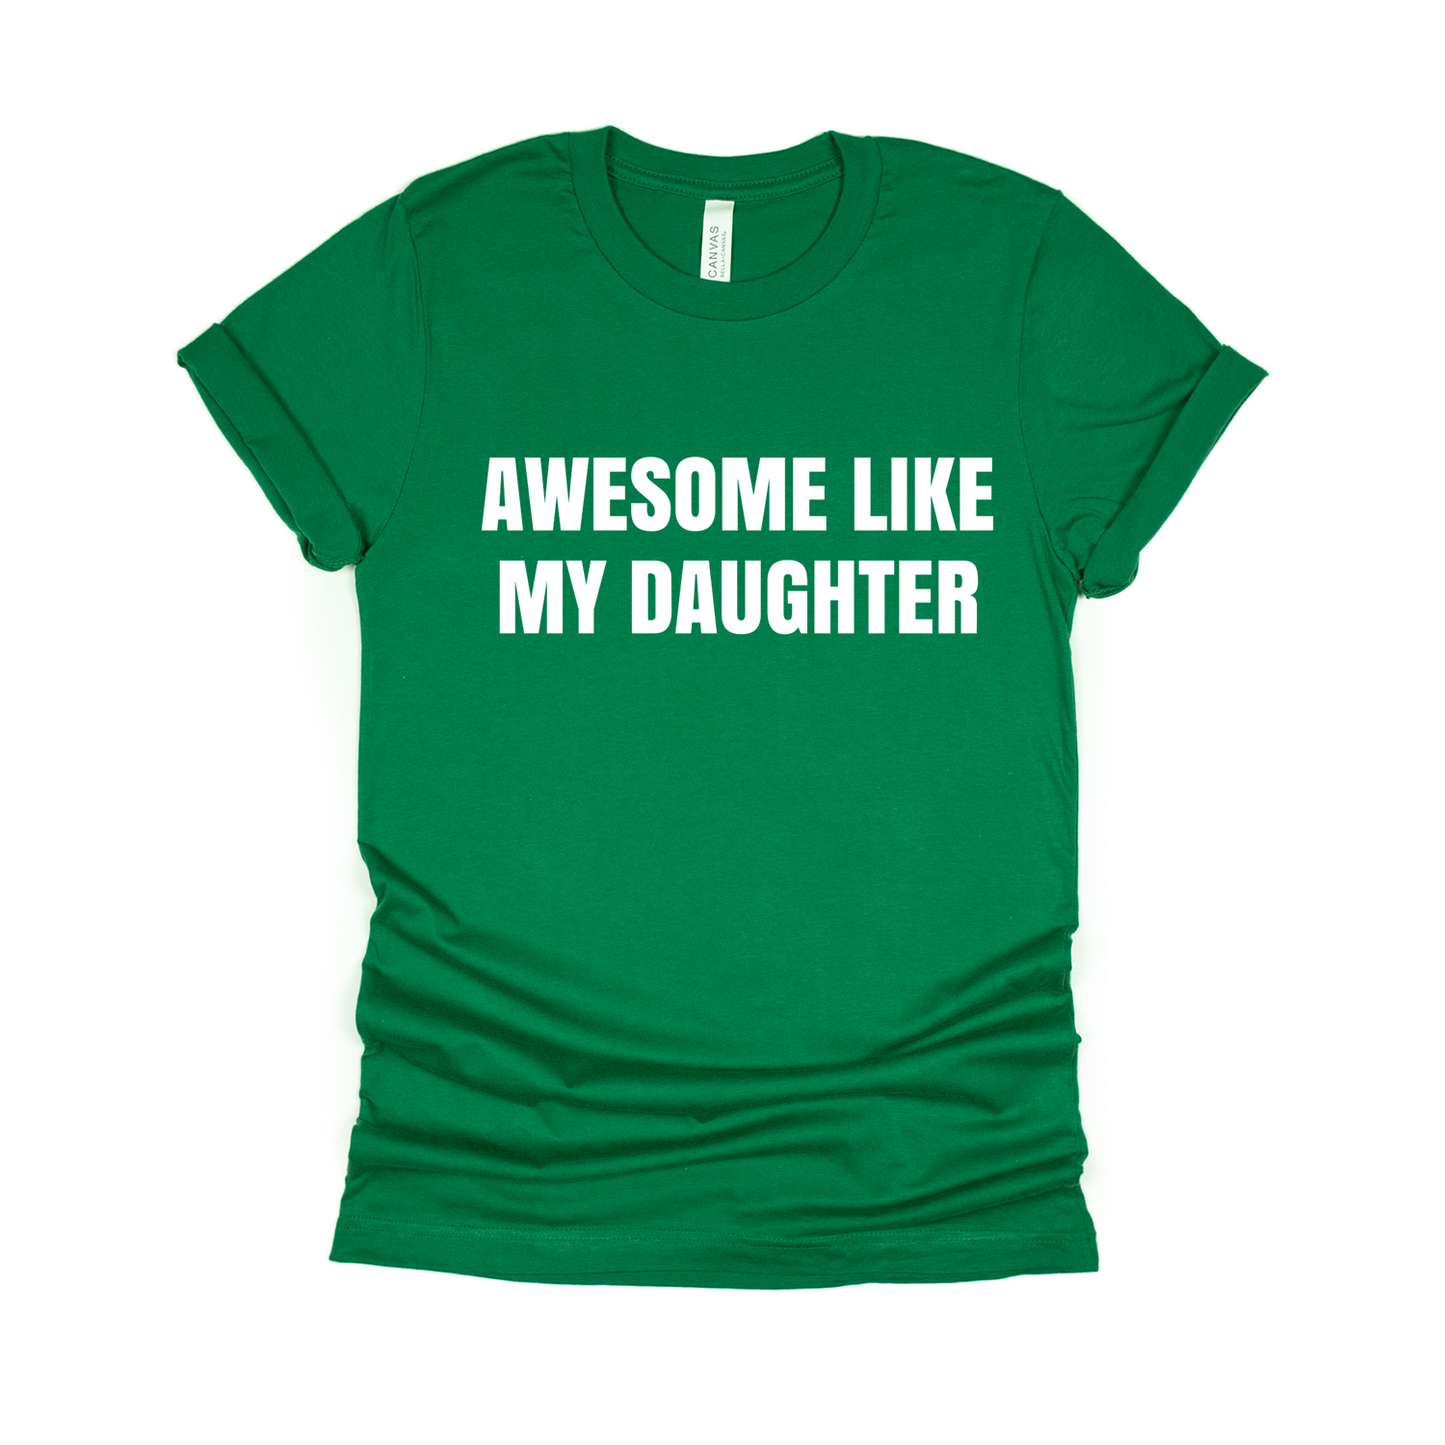 Awesome Like my Daughter - Unisex Soft T-shirt